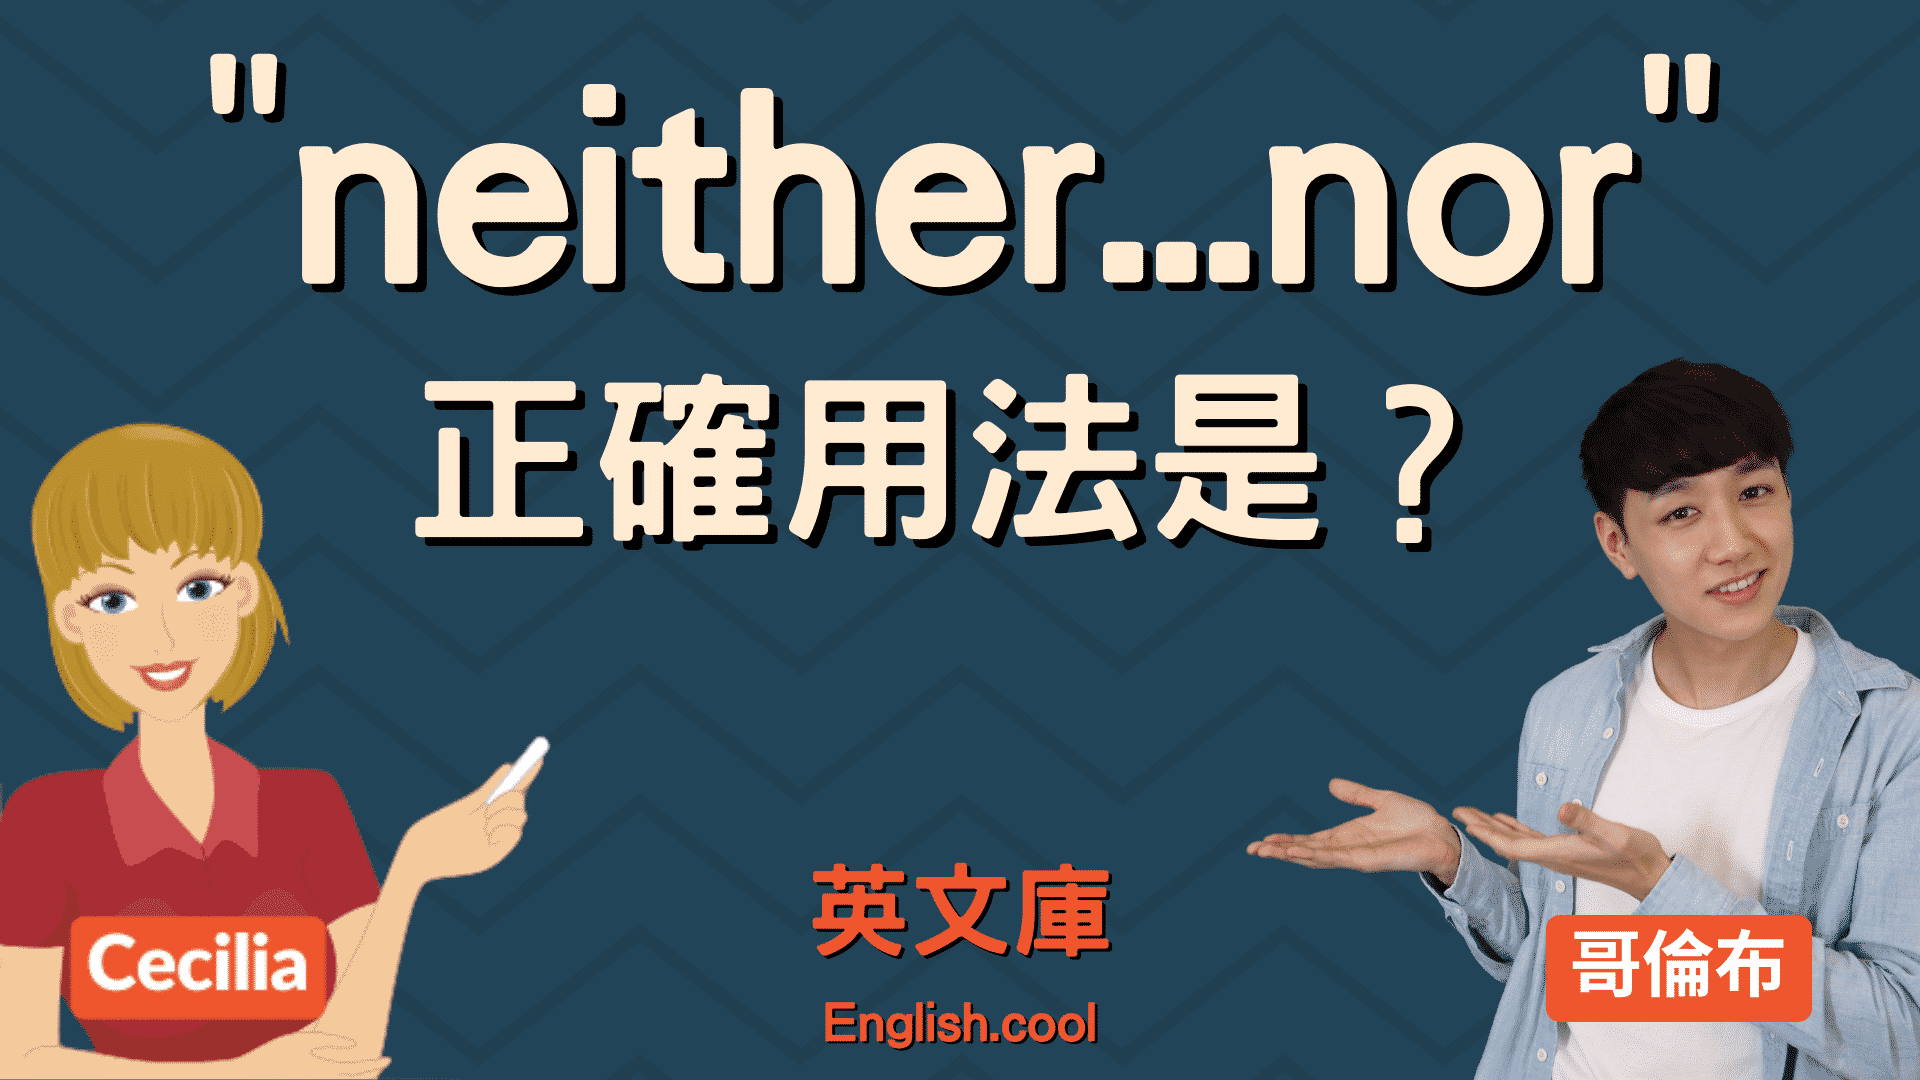 You are currently viewing 「neither.. nor..」的正確用法是？跟 either or 差在哪？